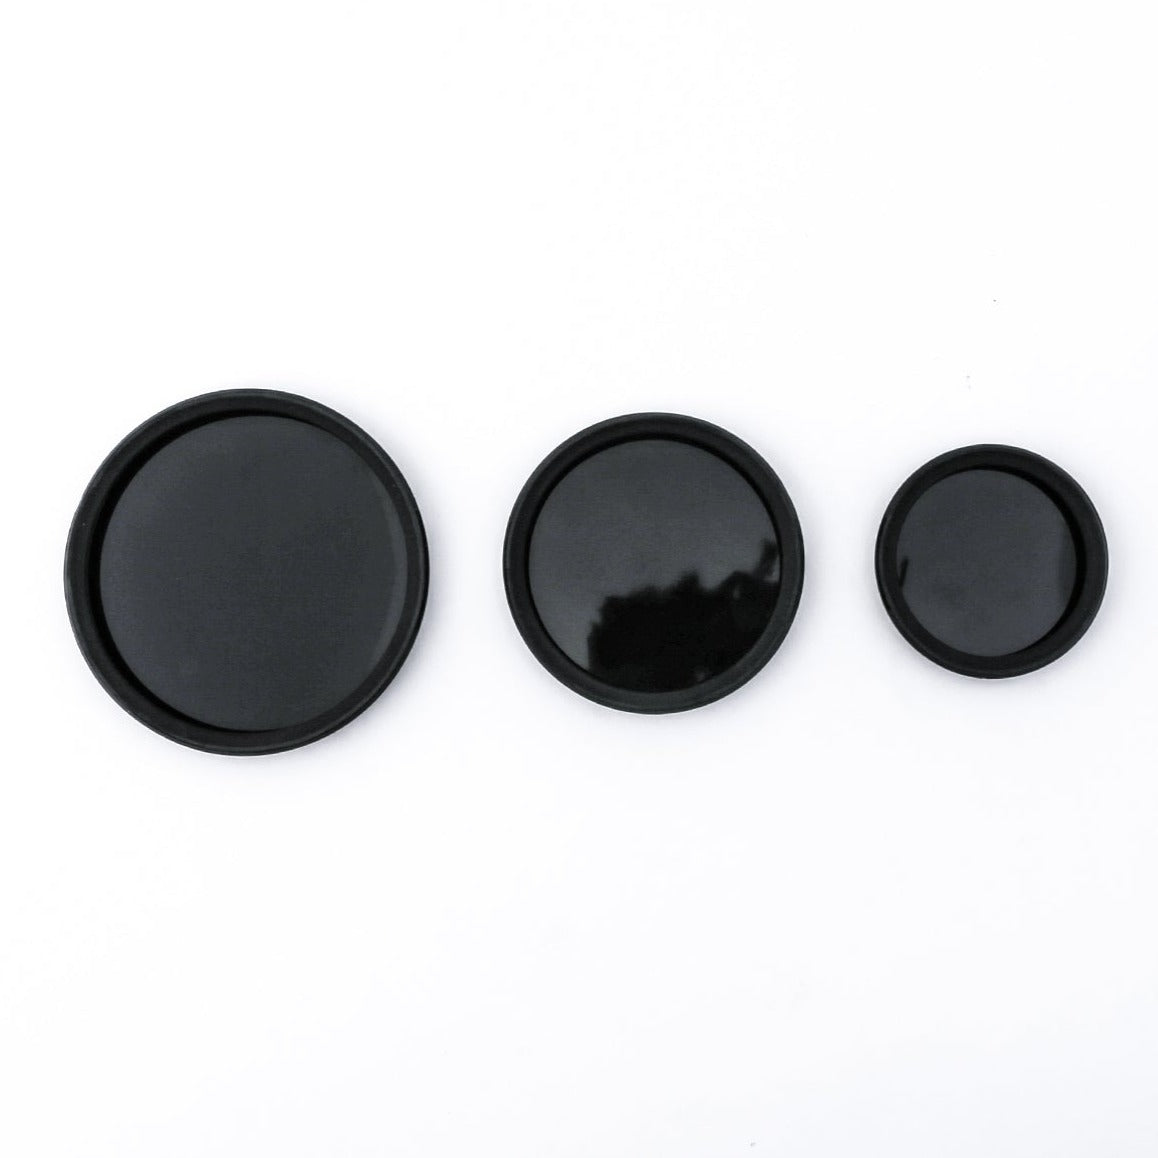 LIDS BLACK (SILICONE) FOR WECK (M)